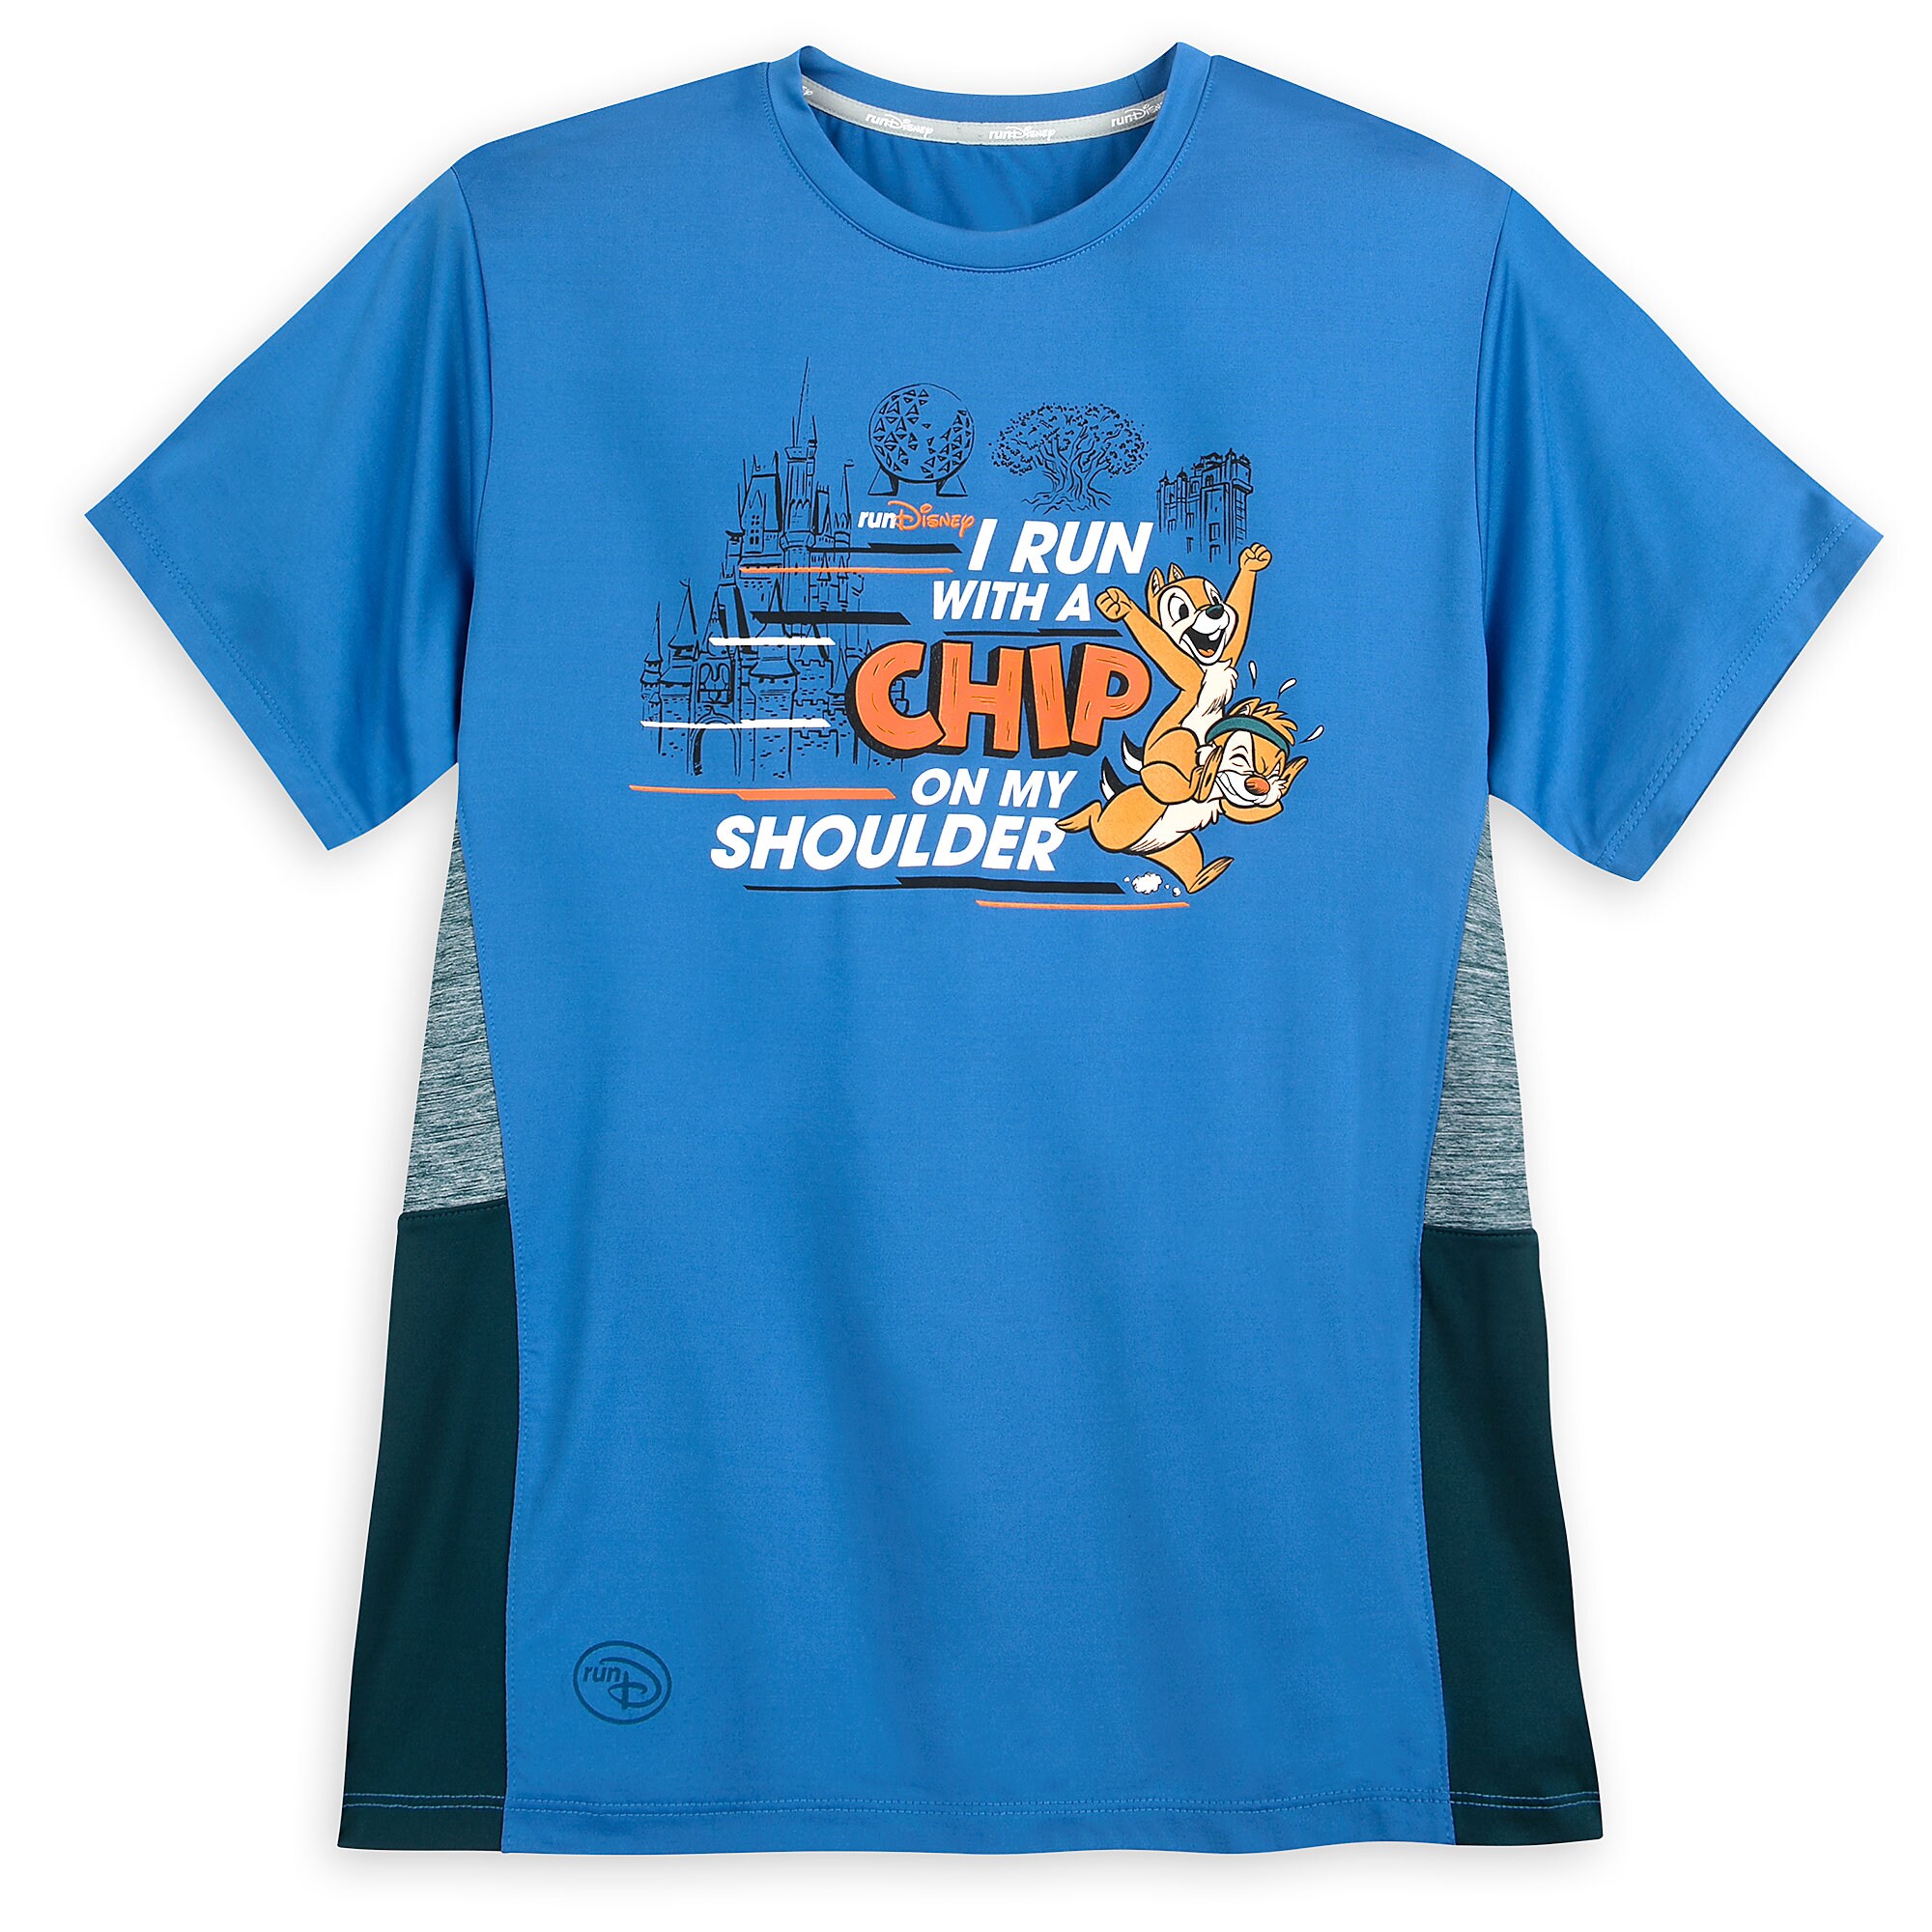 Chip 'n Dale runDisney Performance T-Shirt for Adults